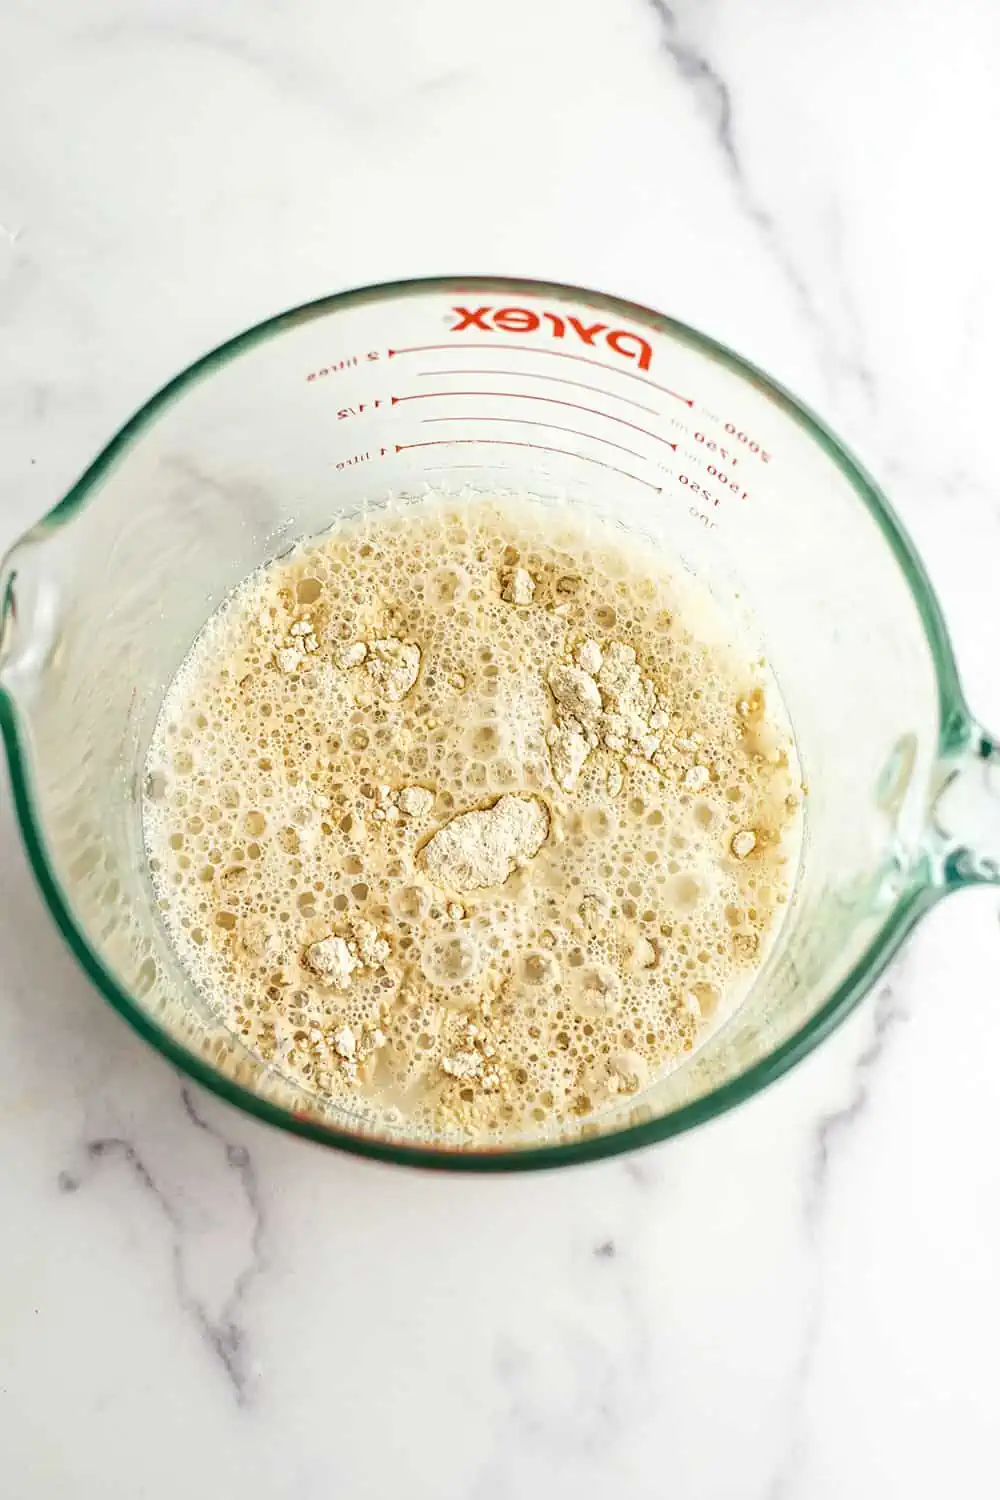 Oat flour, water and salt in a glass mixing bowl.